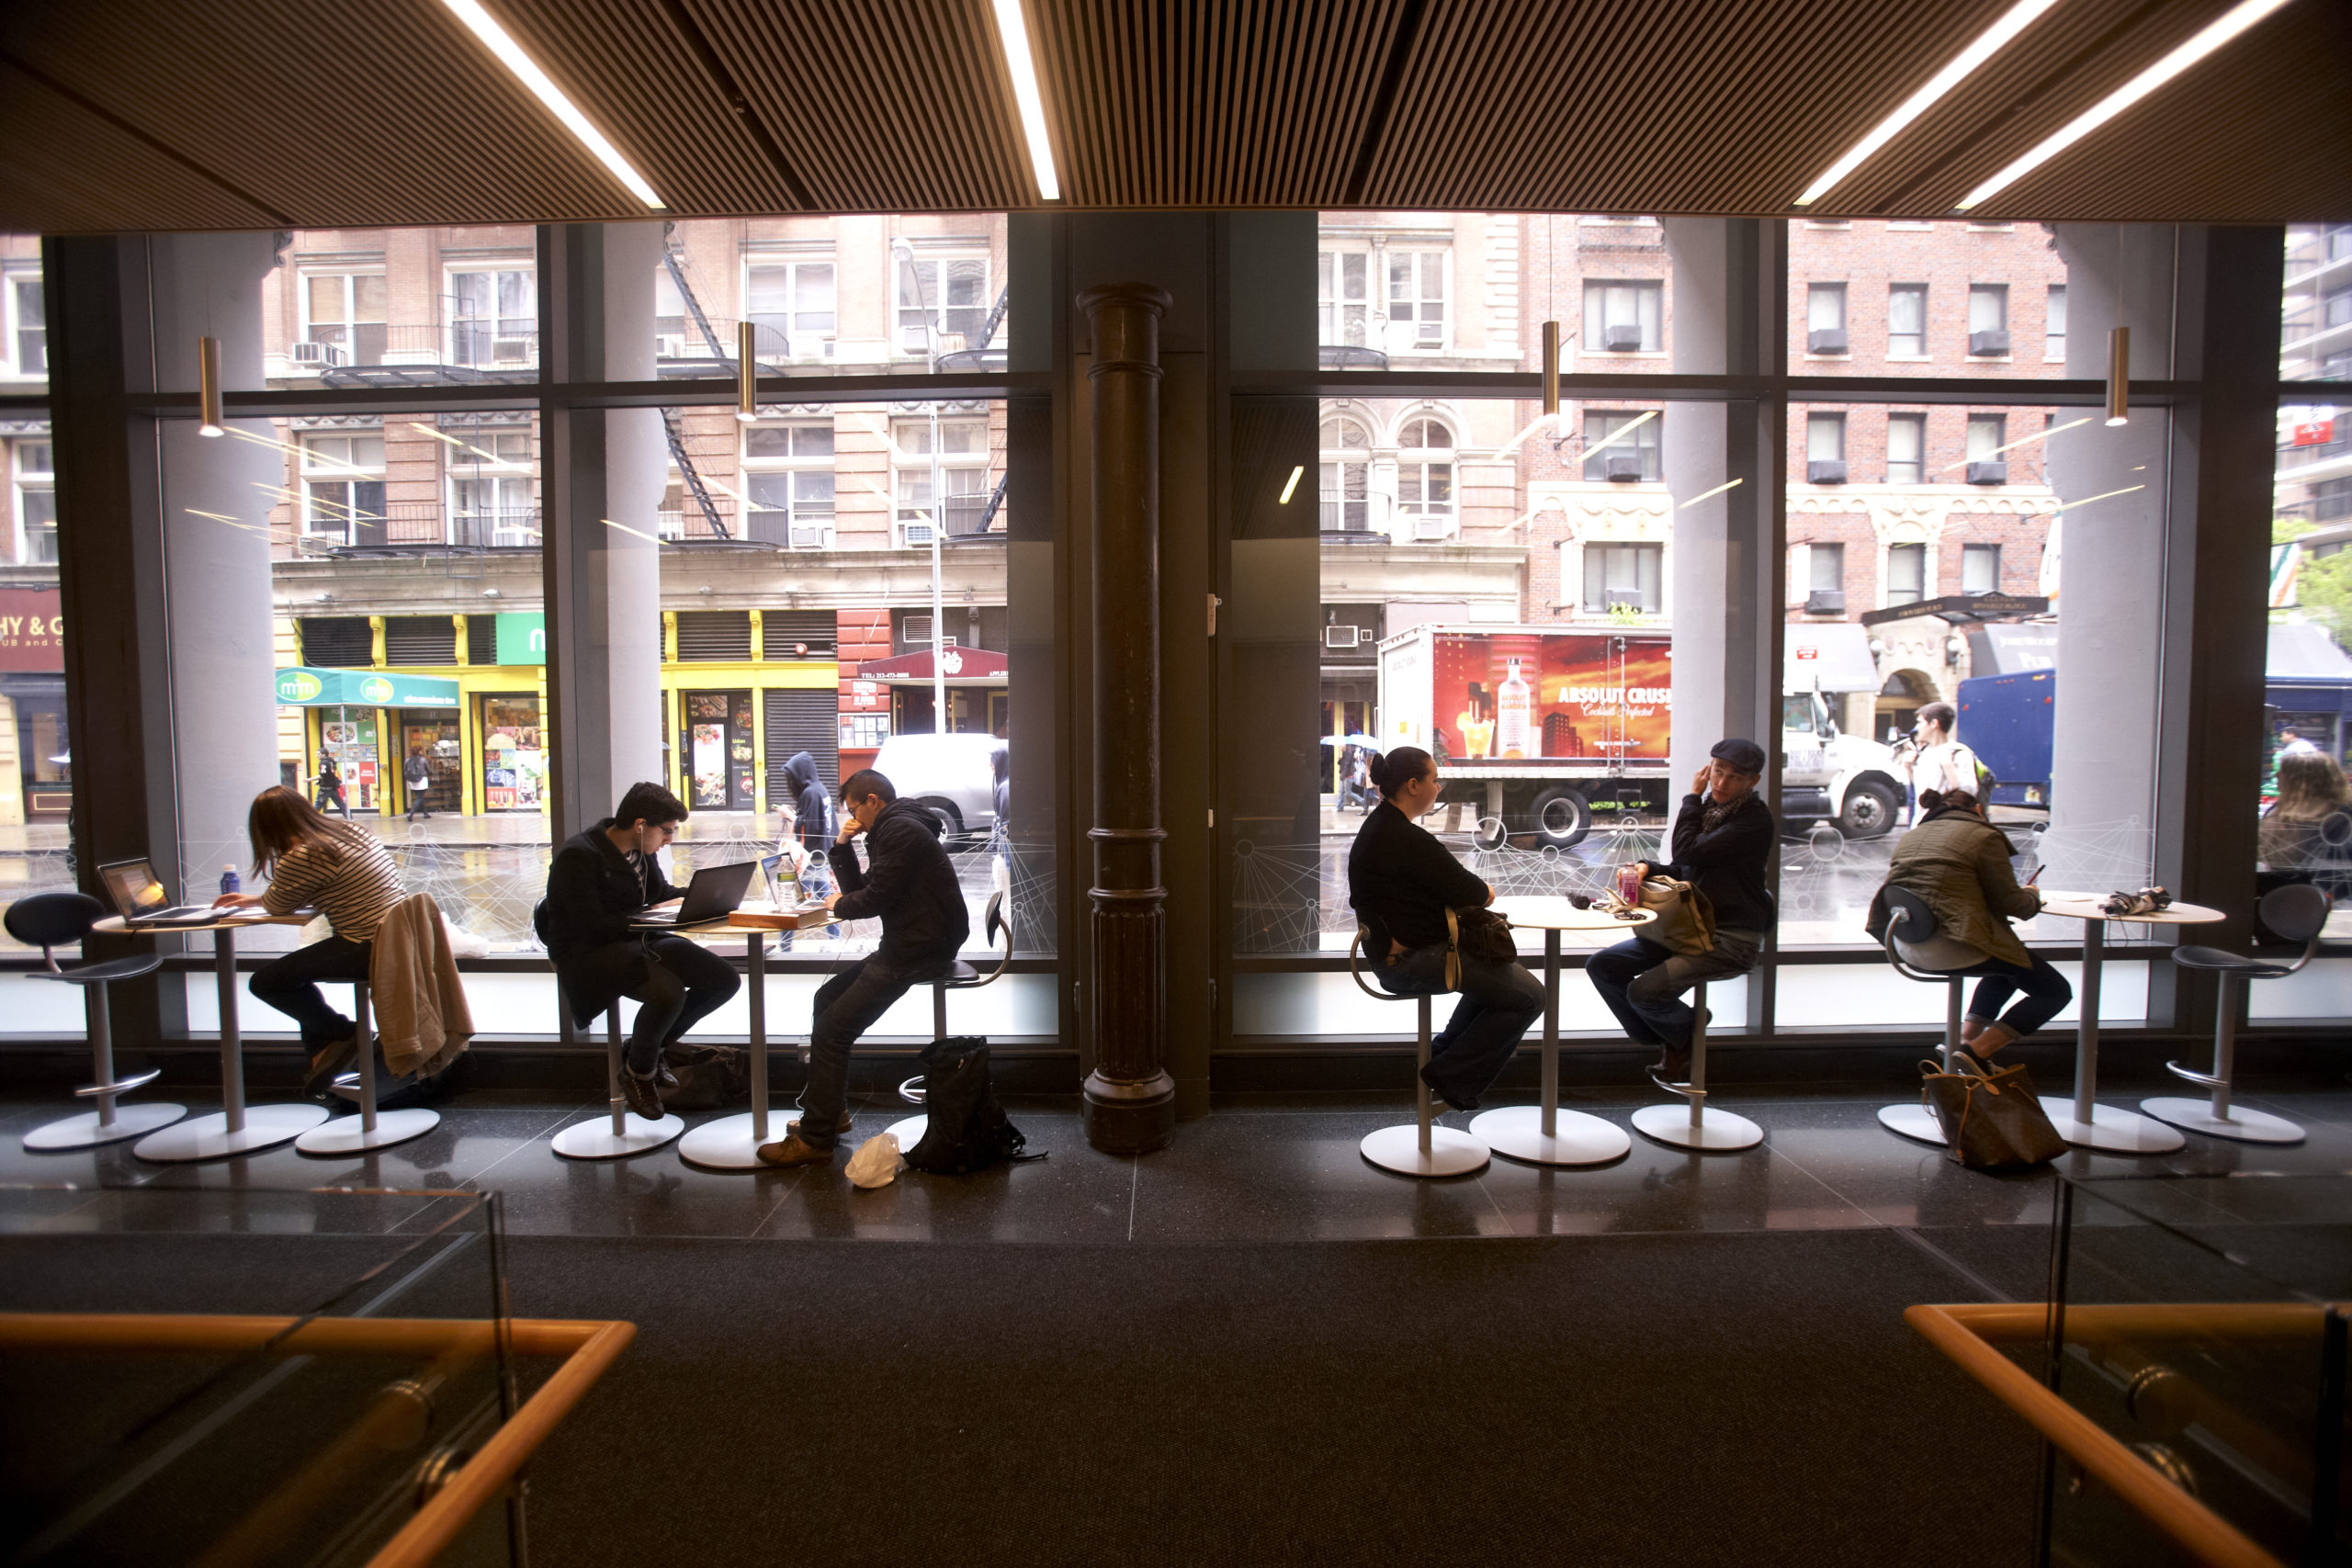 Students sitting at high tables in a lounge area on NYU’s campus. The room has high windows and have a view of the street.